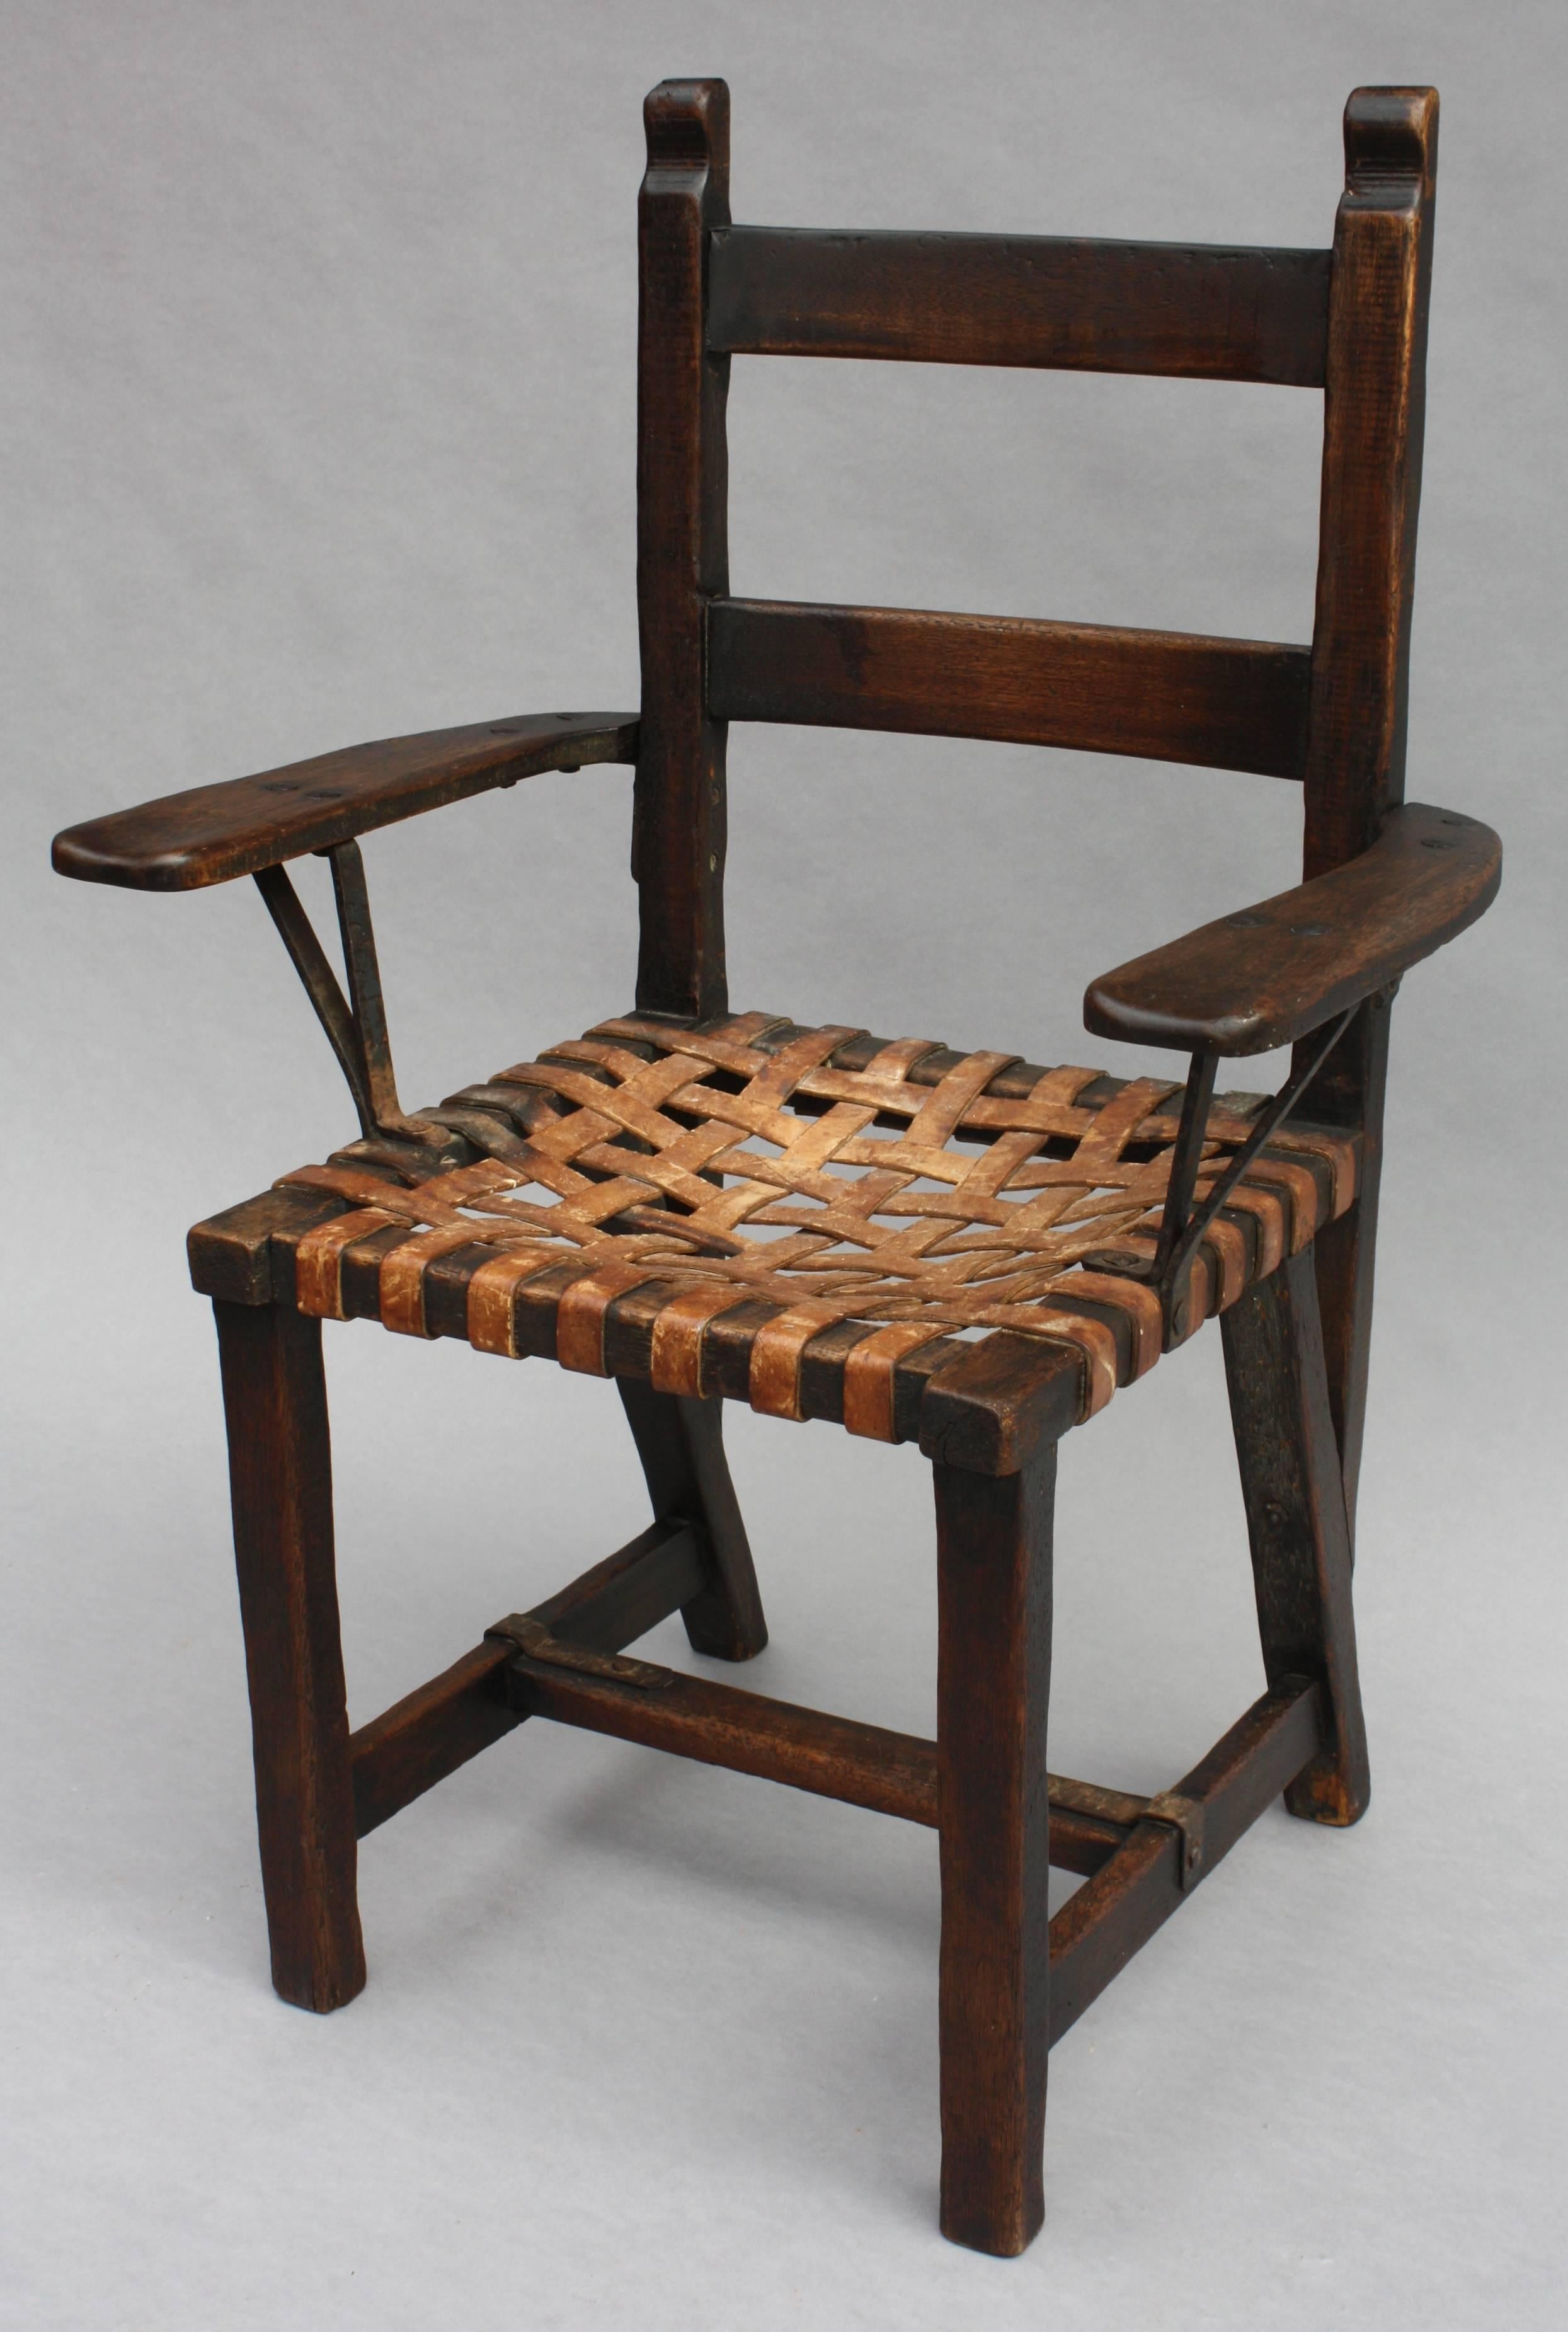 American 1930s Monterey Period Armchair with Woven Leather Seat